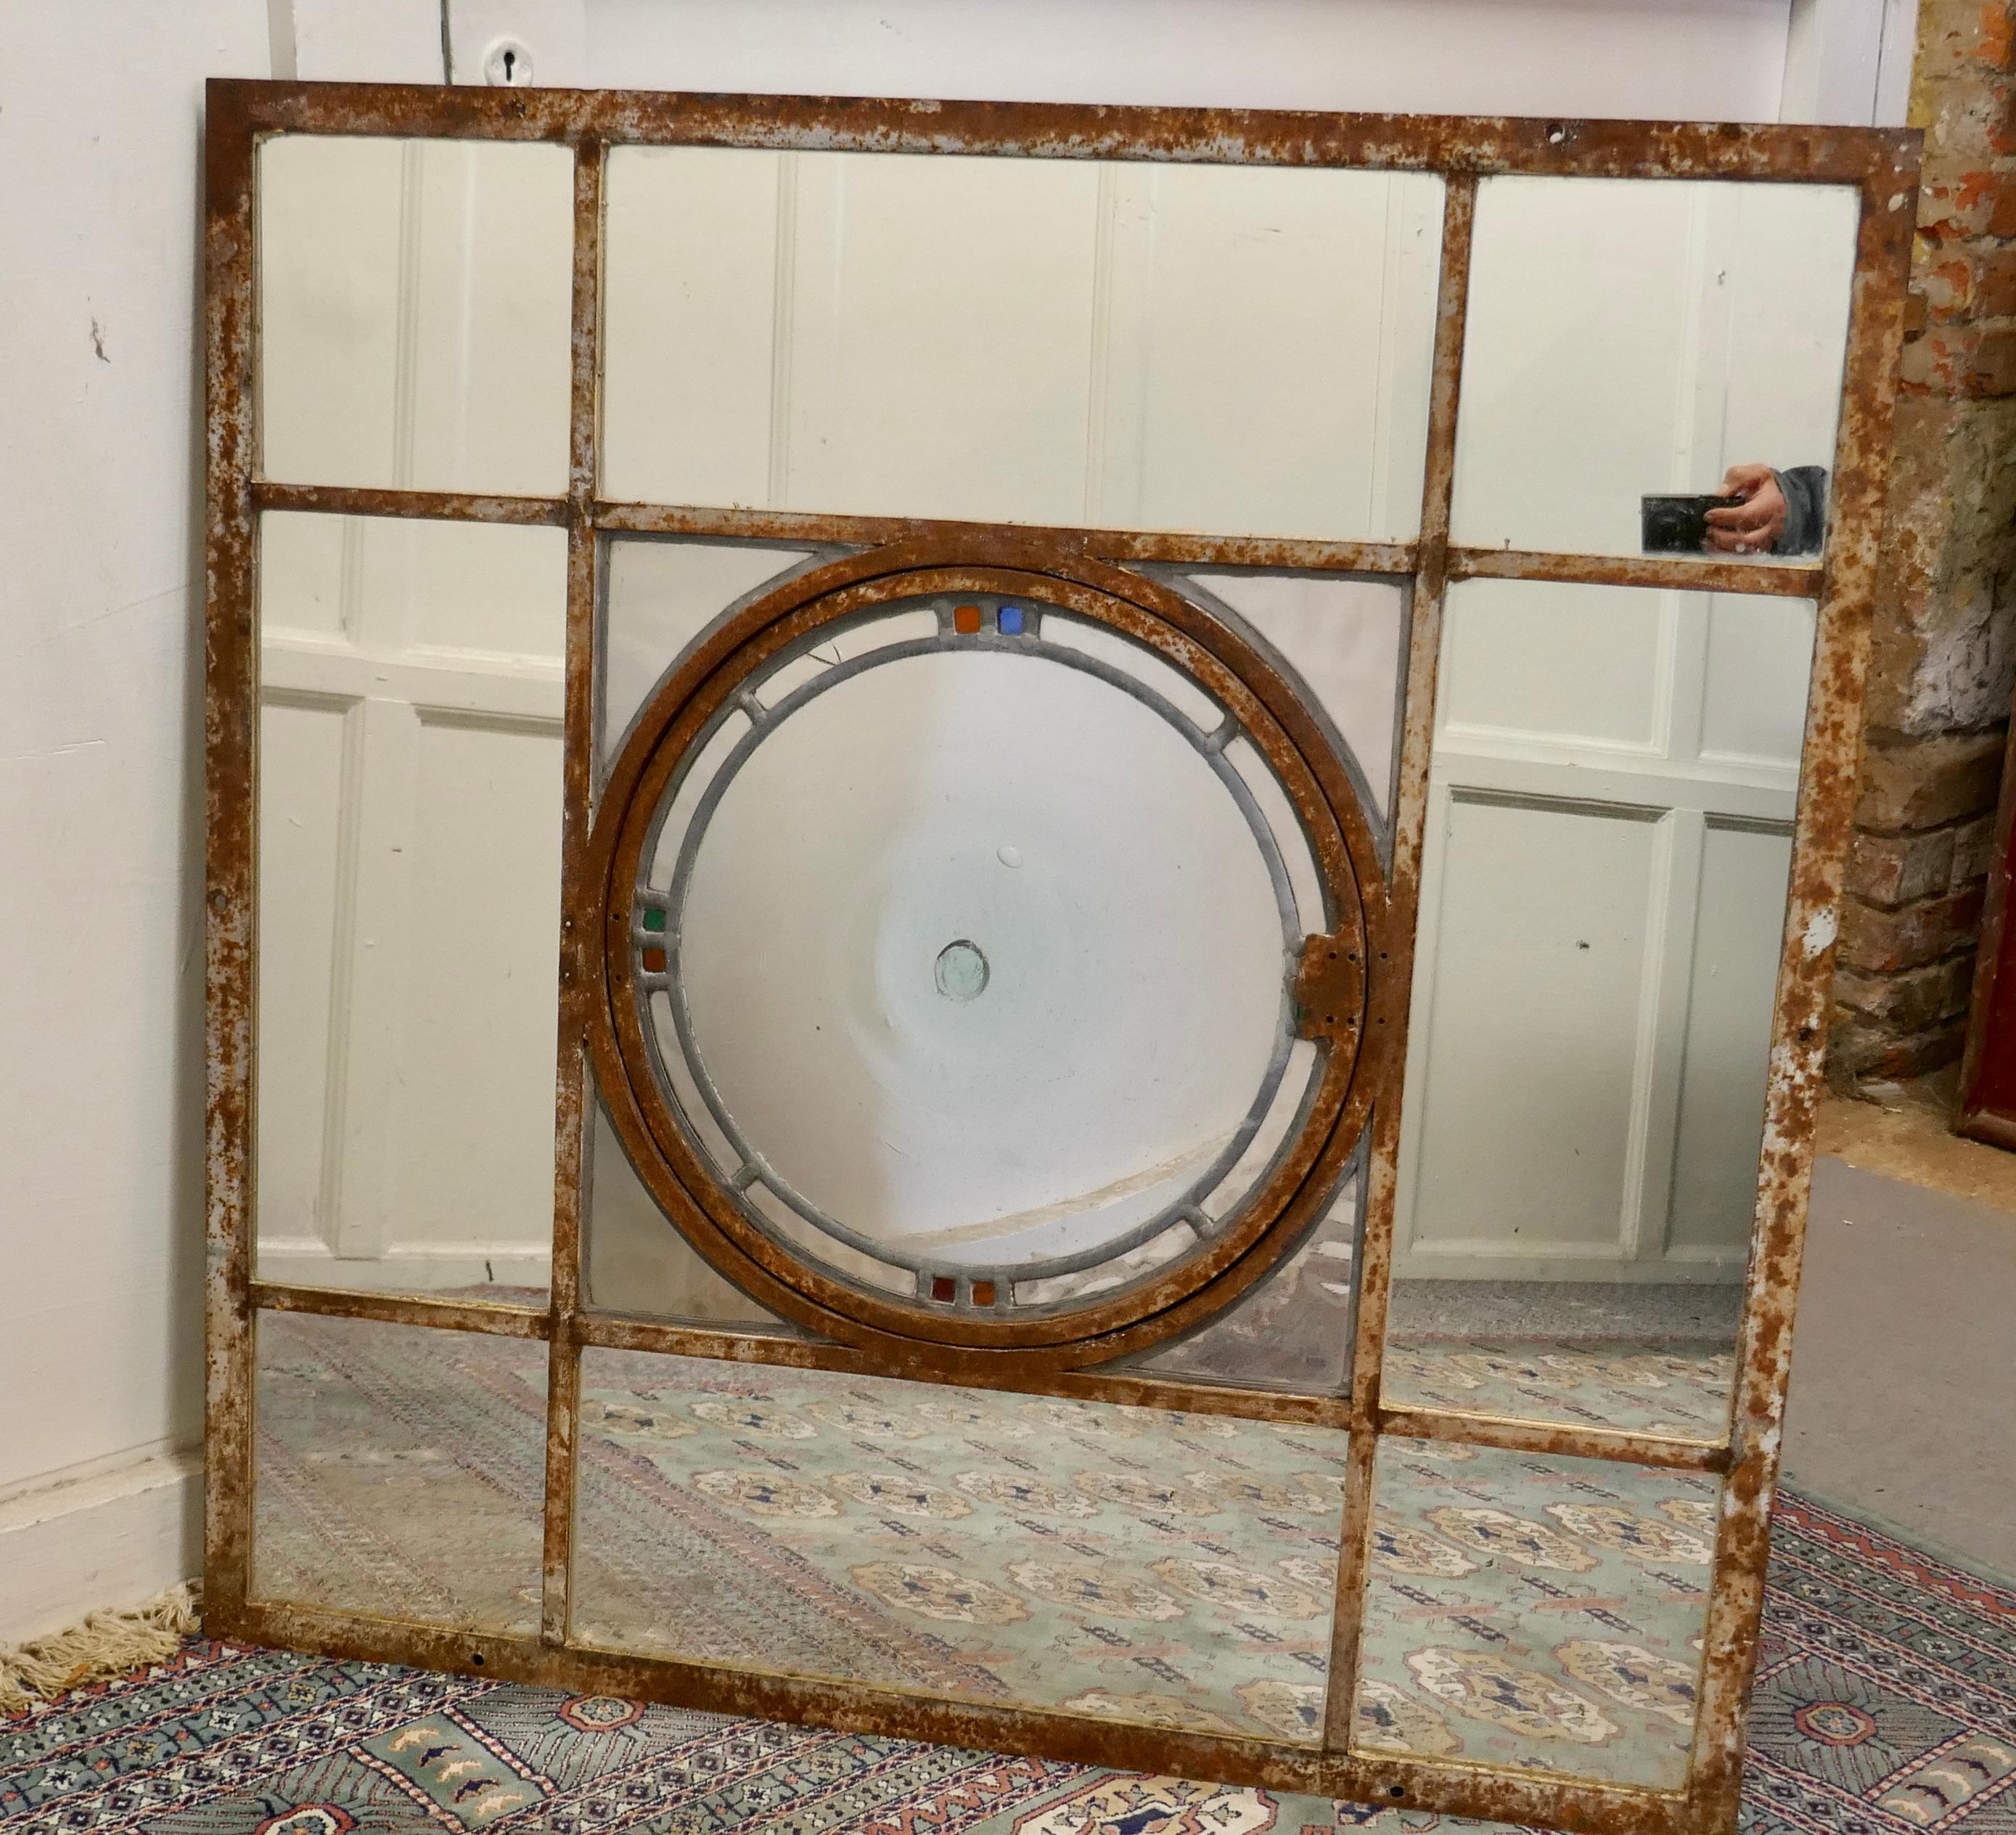 Large 19th century industrial window mirror with central leaded bottle glass opening

This large iron window frame has an original central opening circular window, the centre piece is original, it is made in stained leaded glass with a large 17”